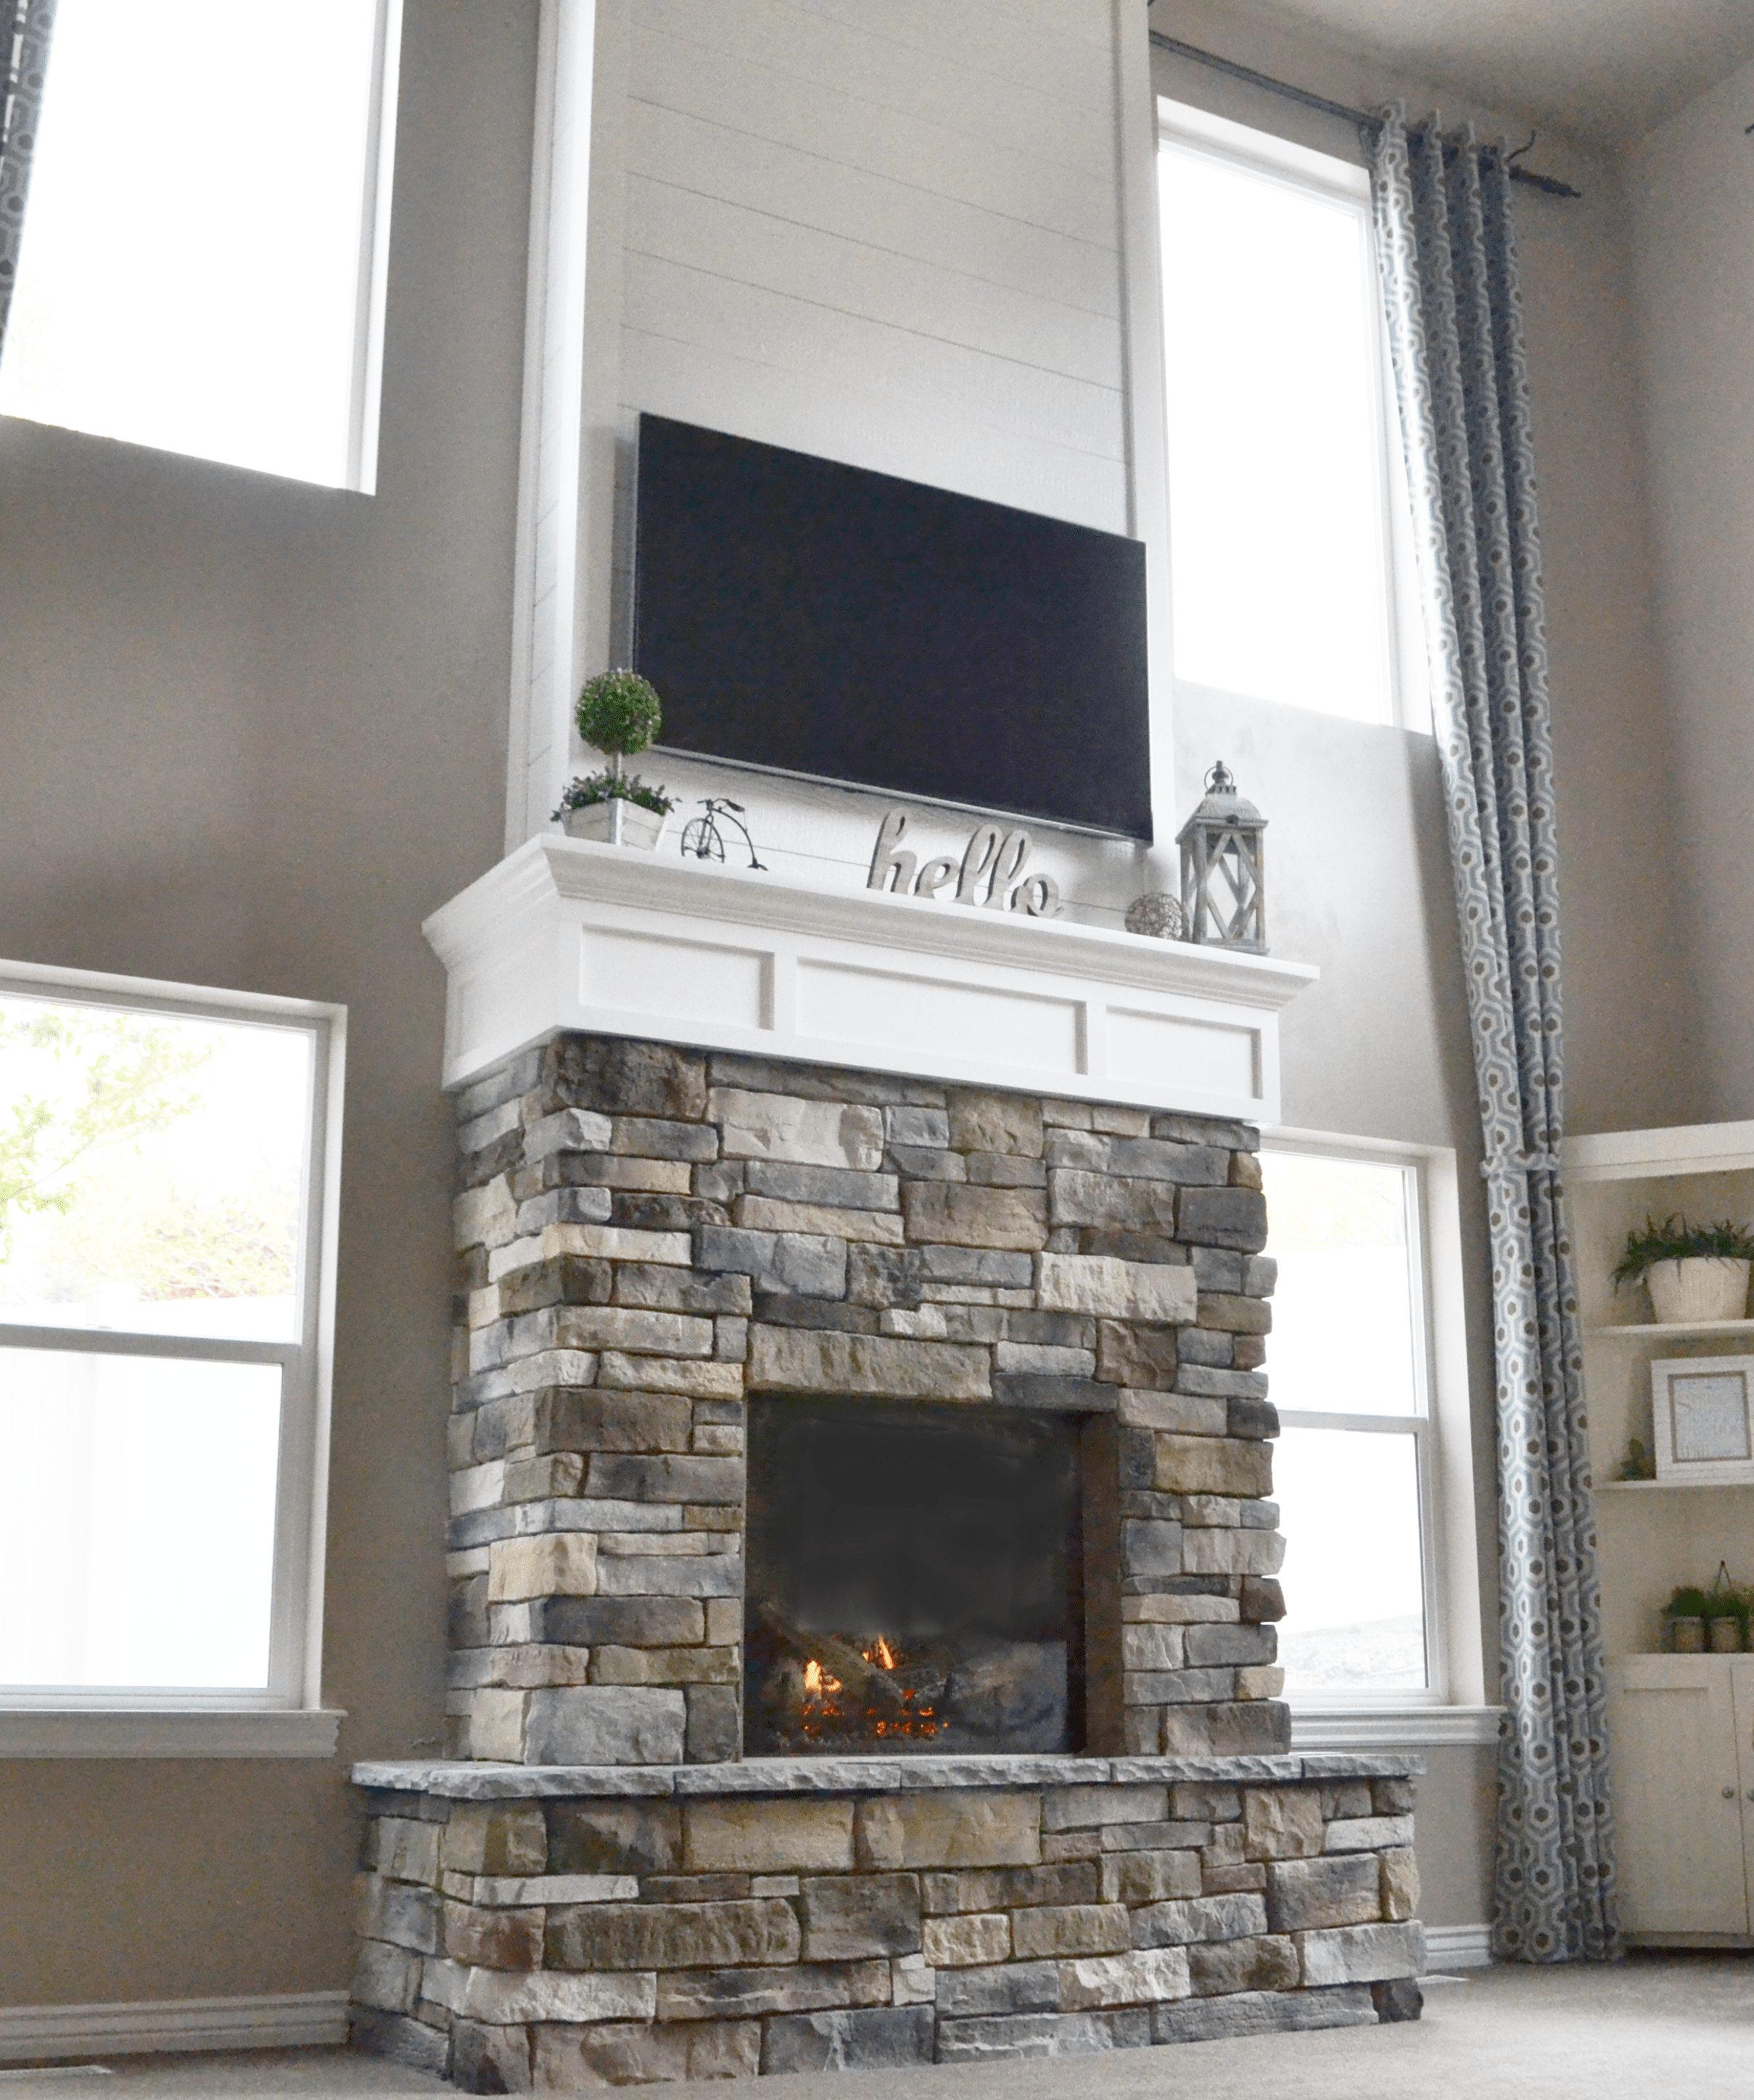 Diy Fireplace Surround and Mantel Best Of Diy Fireplace with Stone & Shiplap